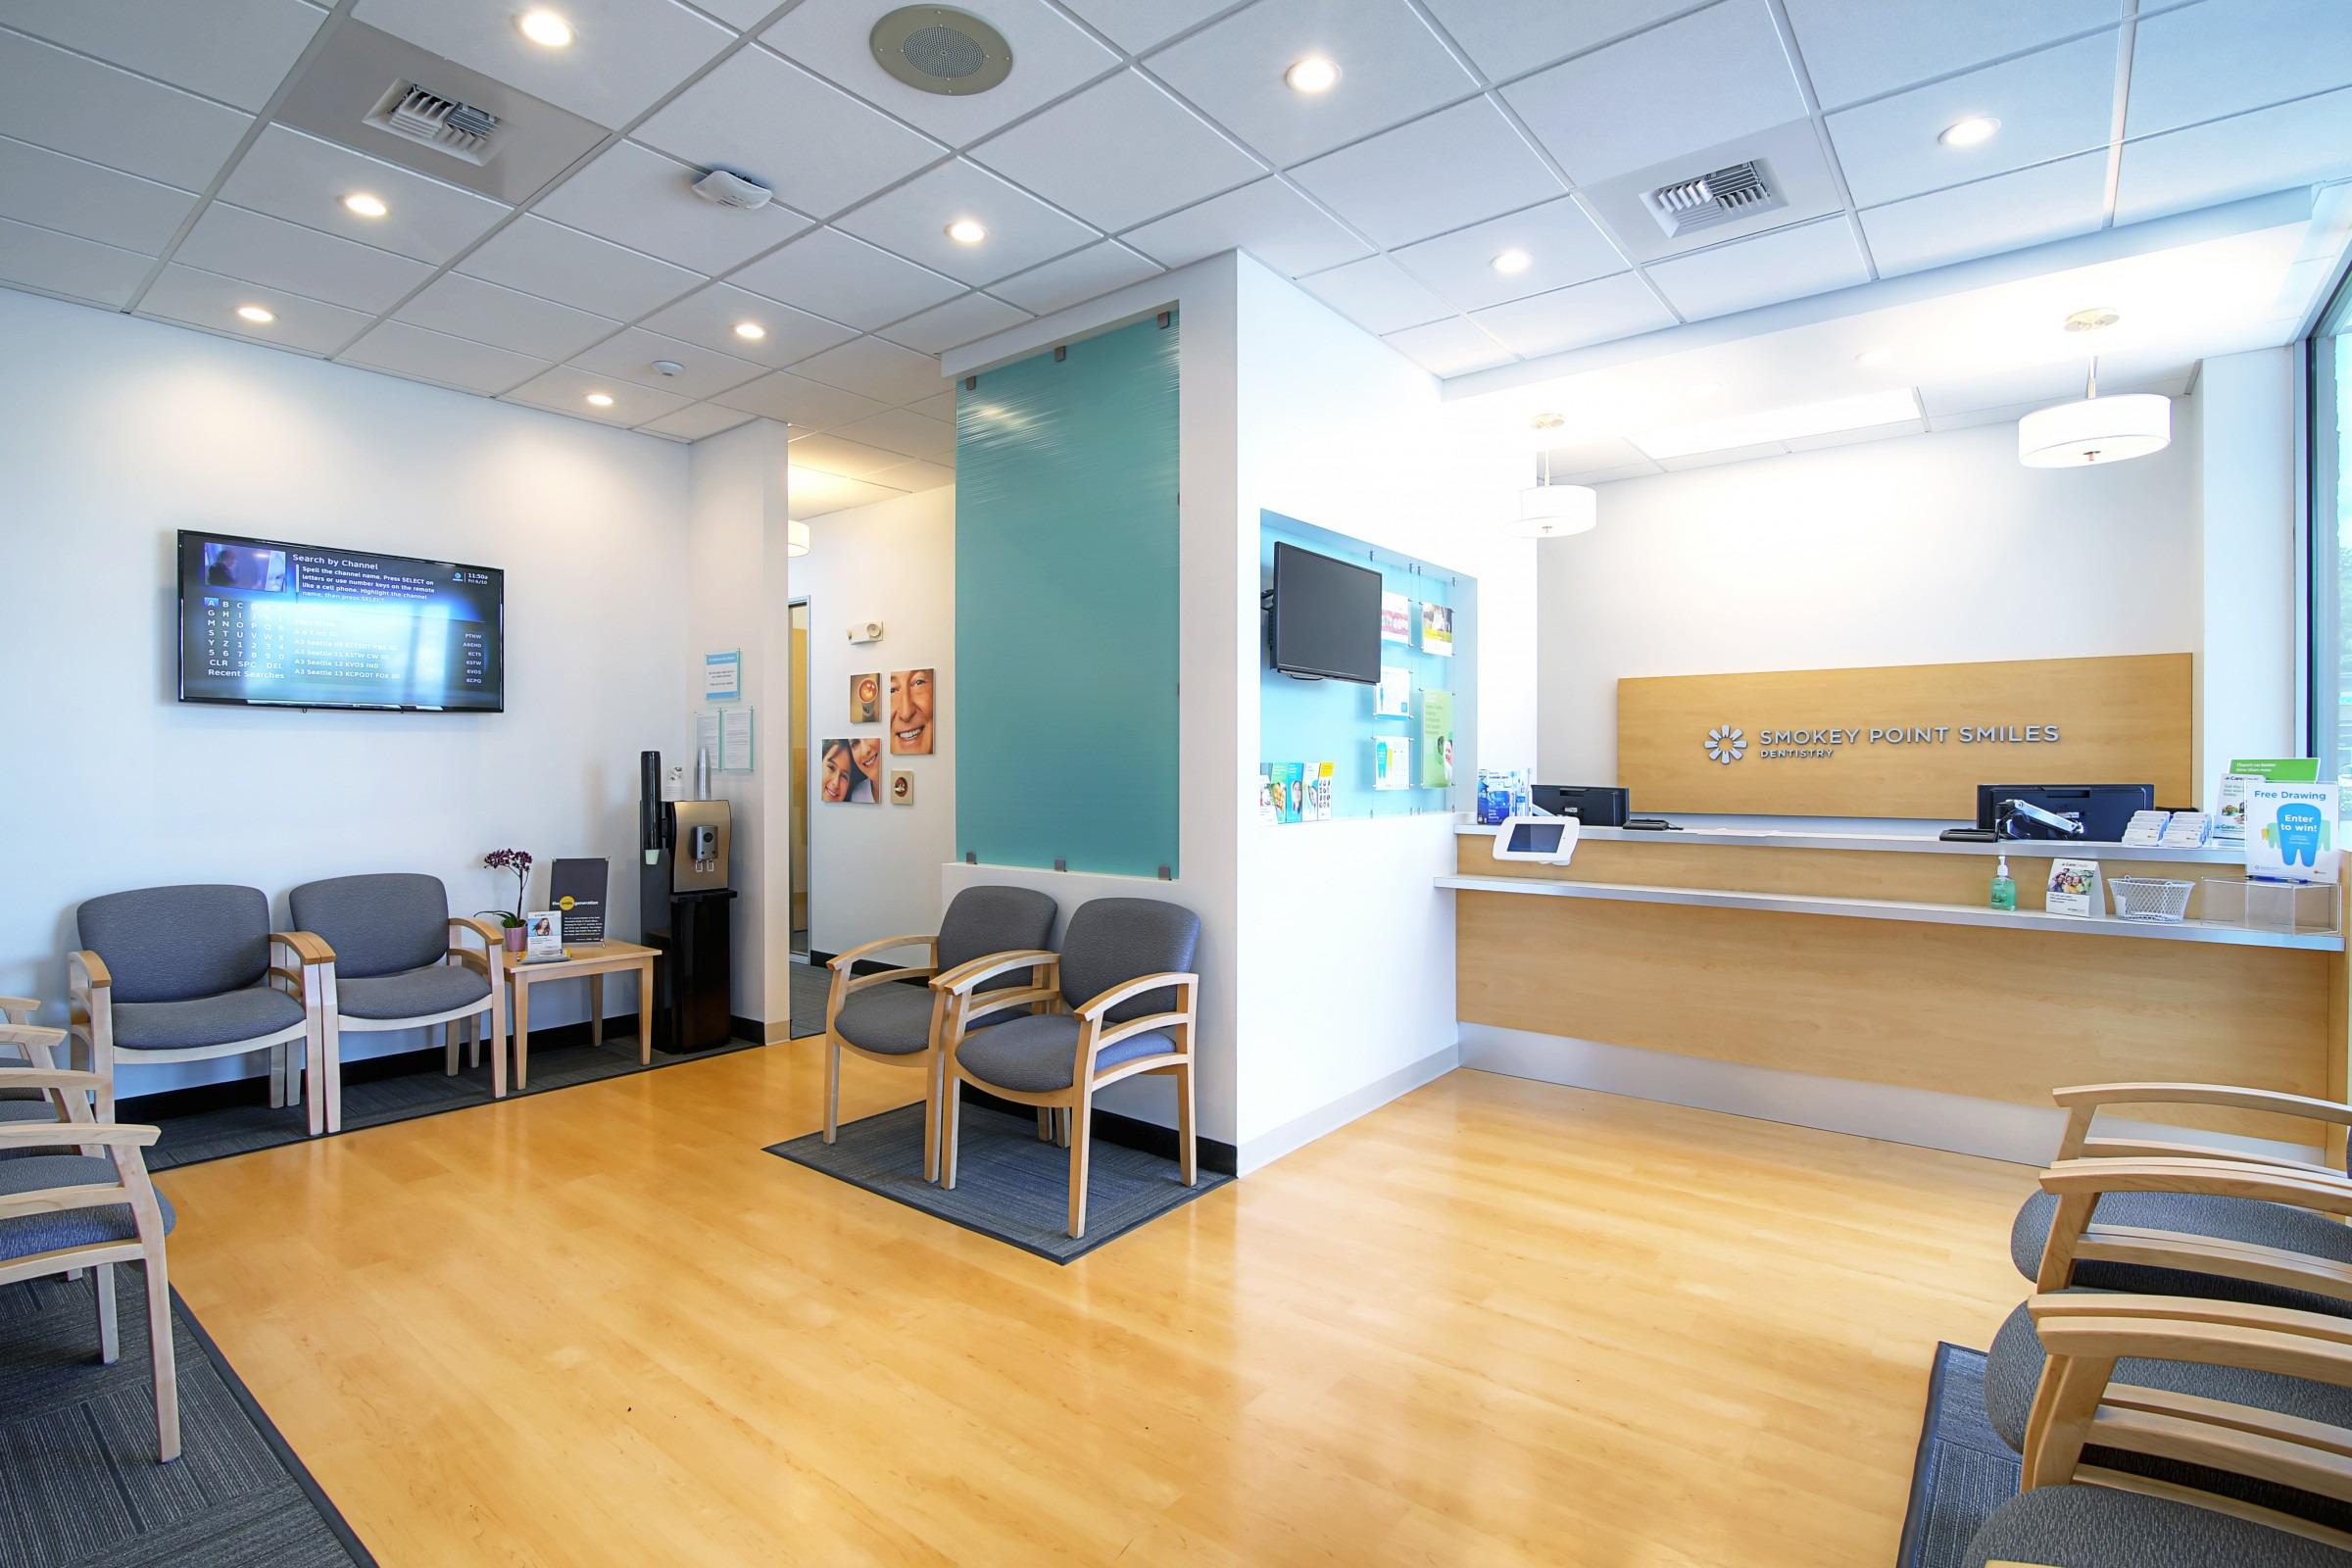 Smokey Point Smiles Dentistry opened its doors to the Marysville community in May 2016.